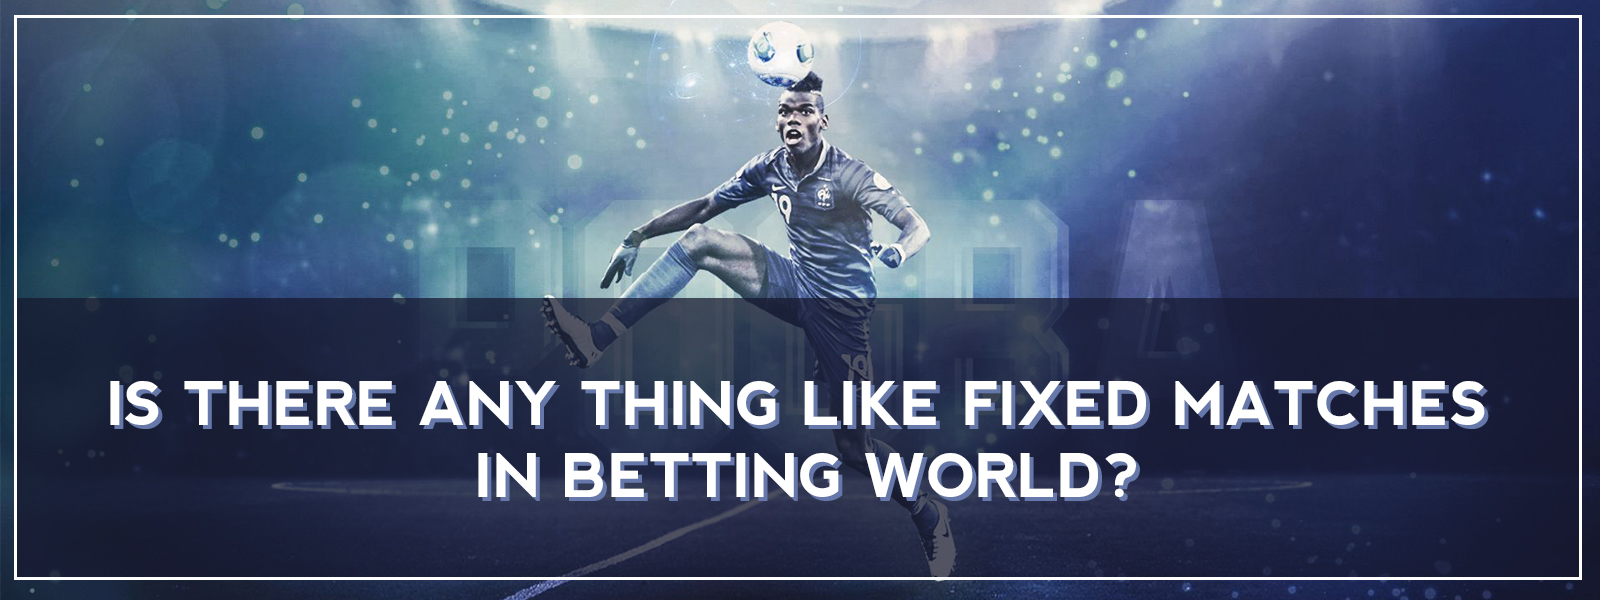 Is There Any Thing Like Fixed Matches In Betting World?